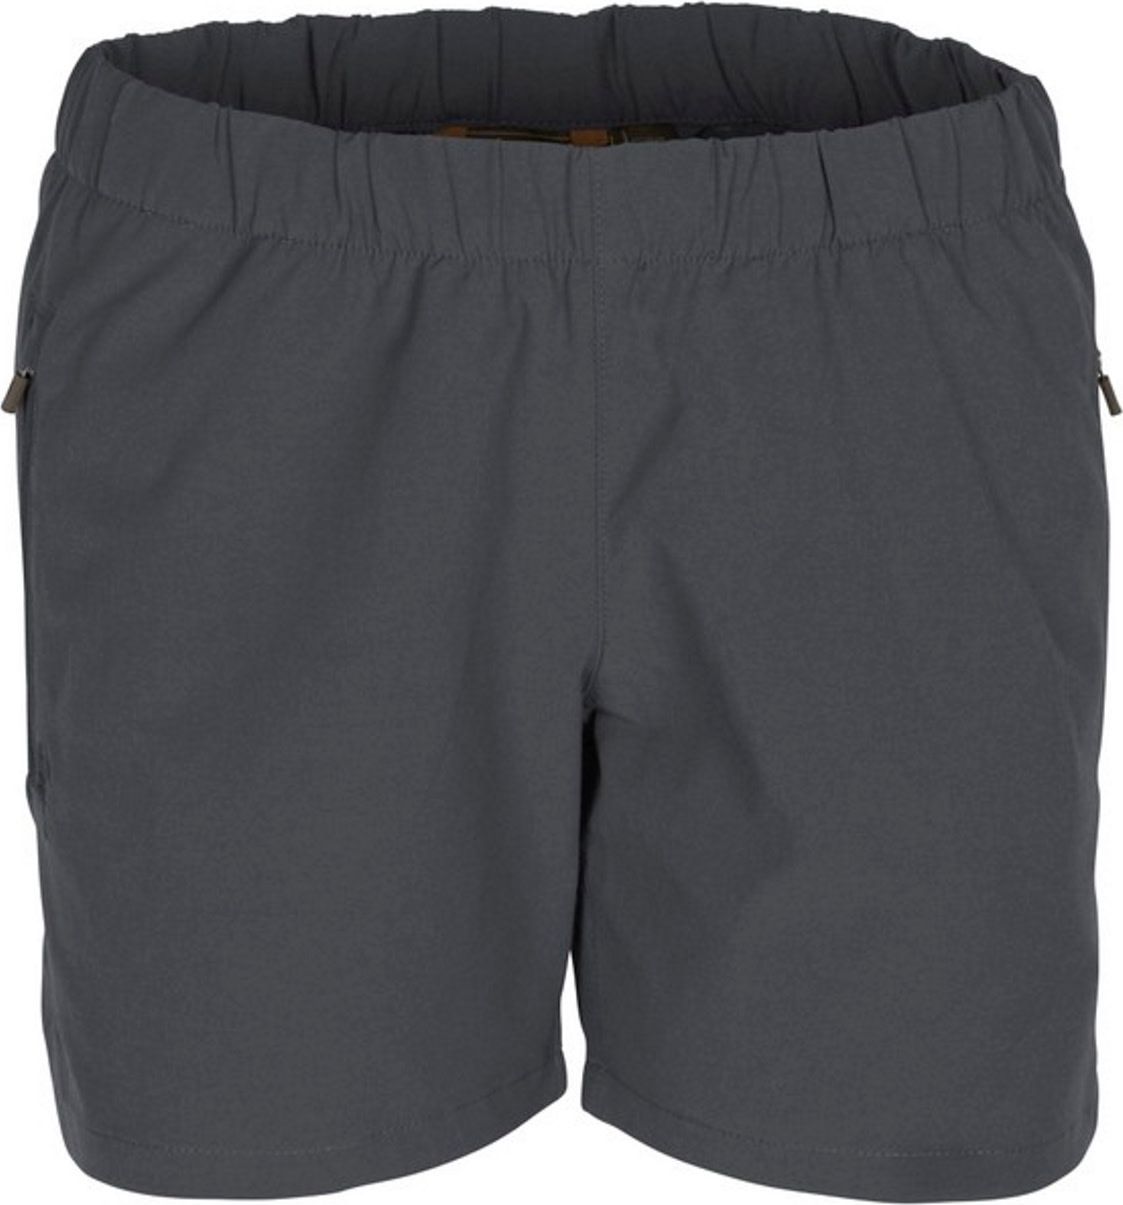 Women's Everyday Travel Shorts Charcoal Grey